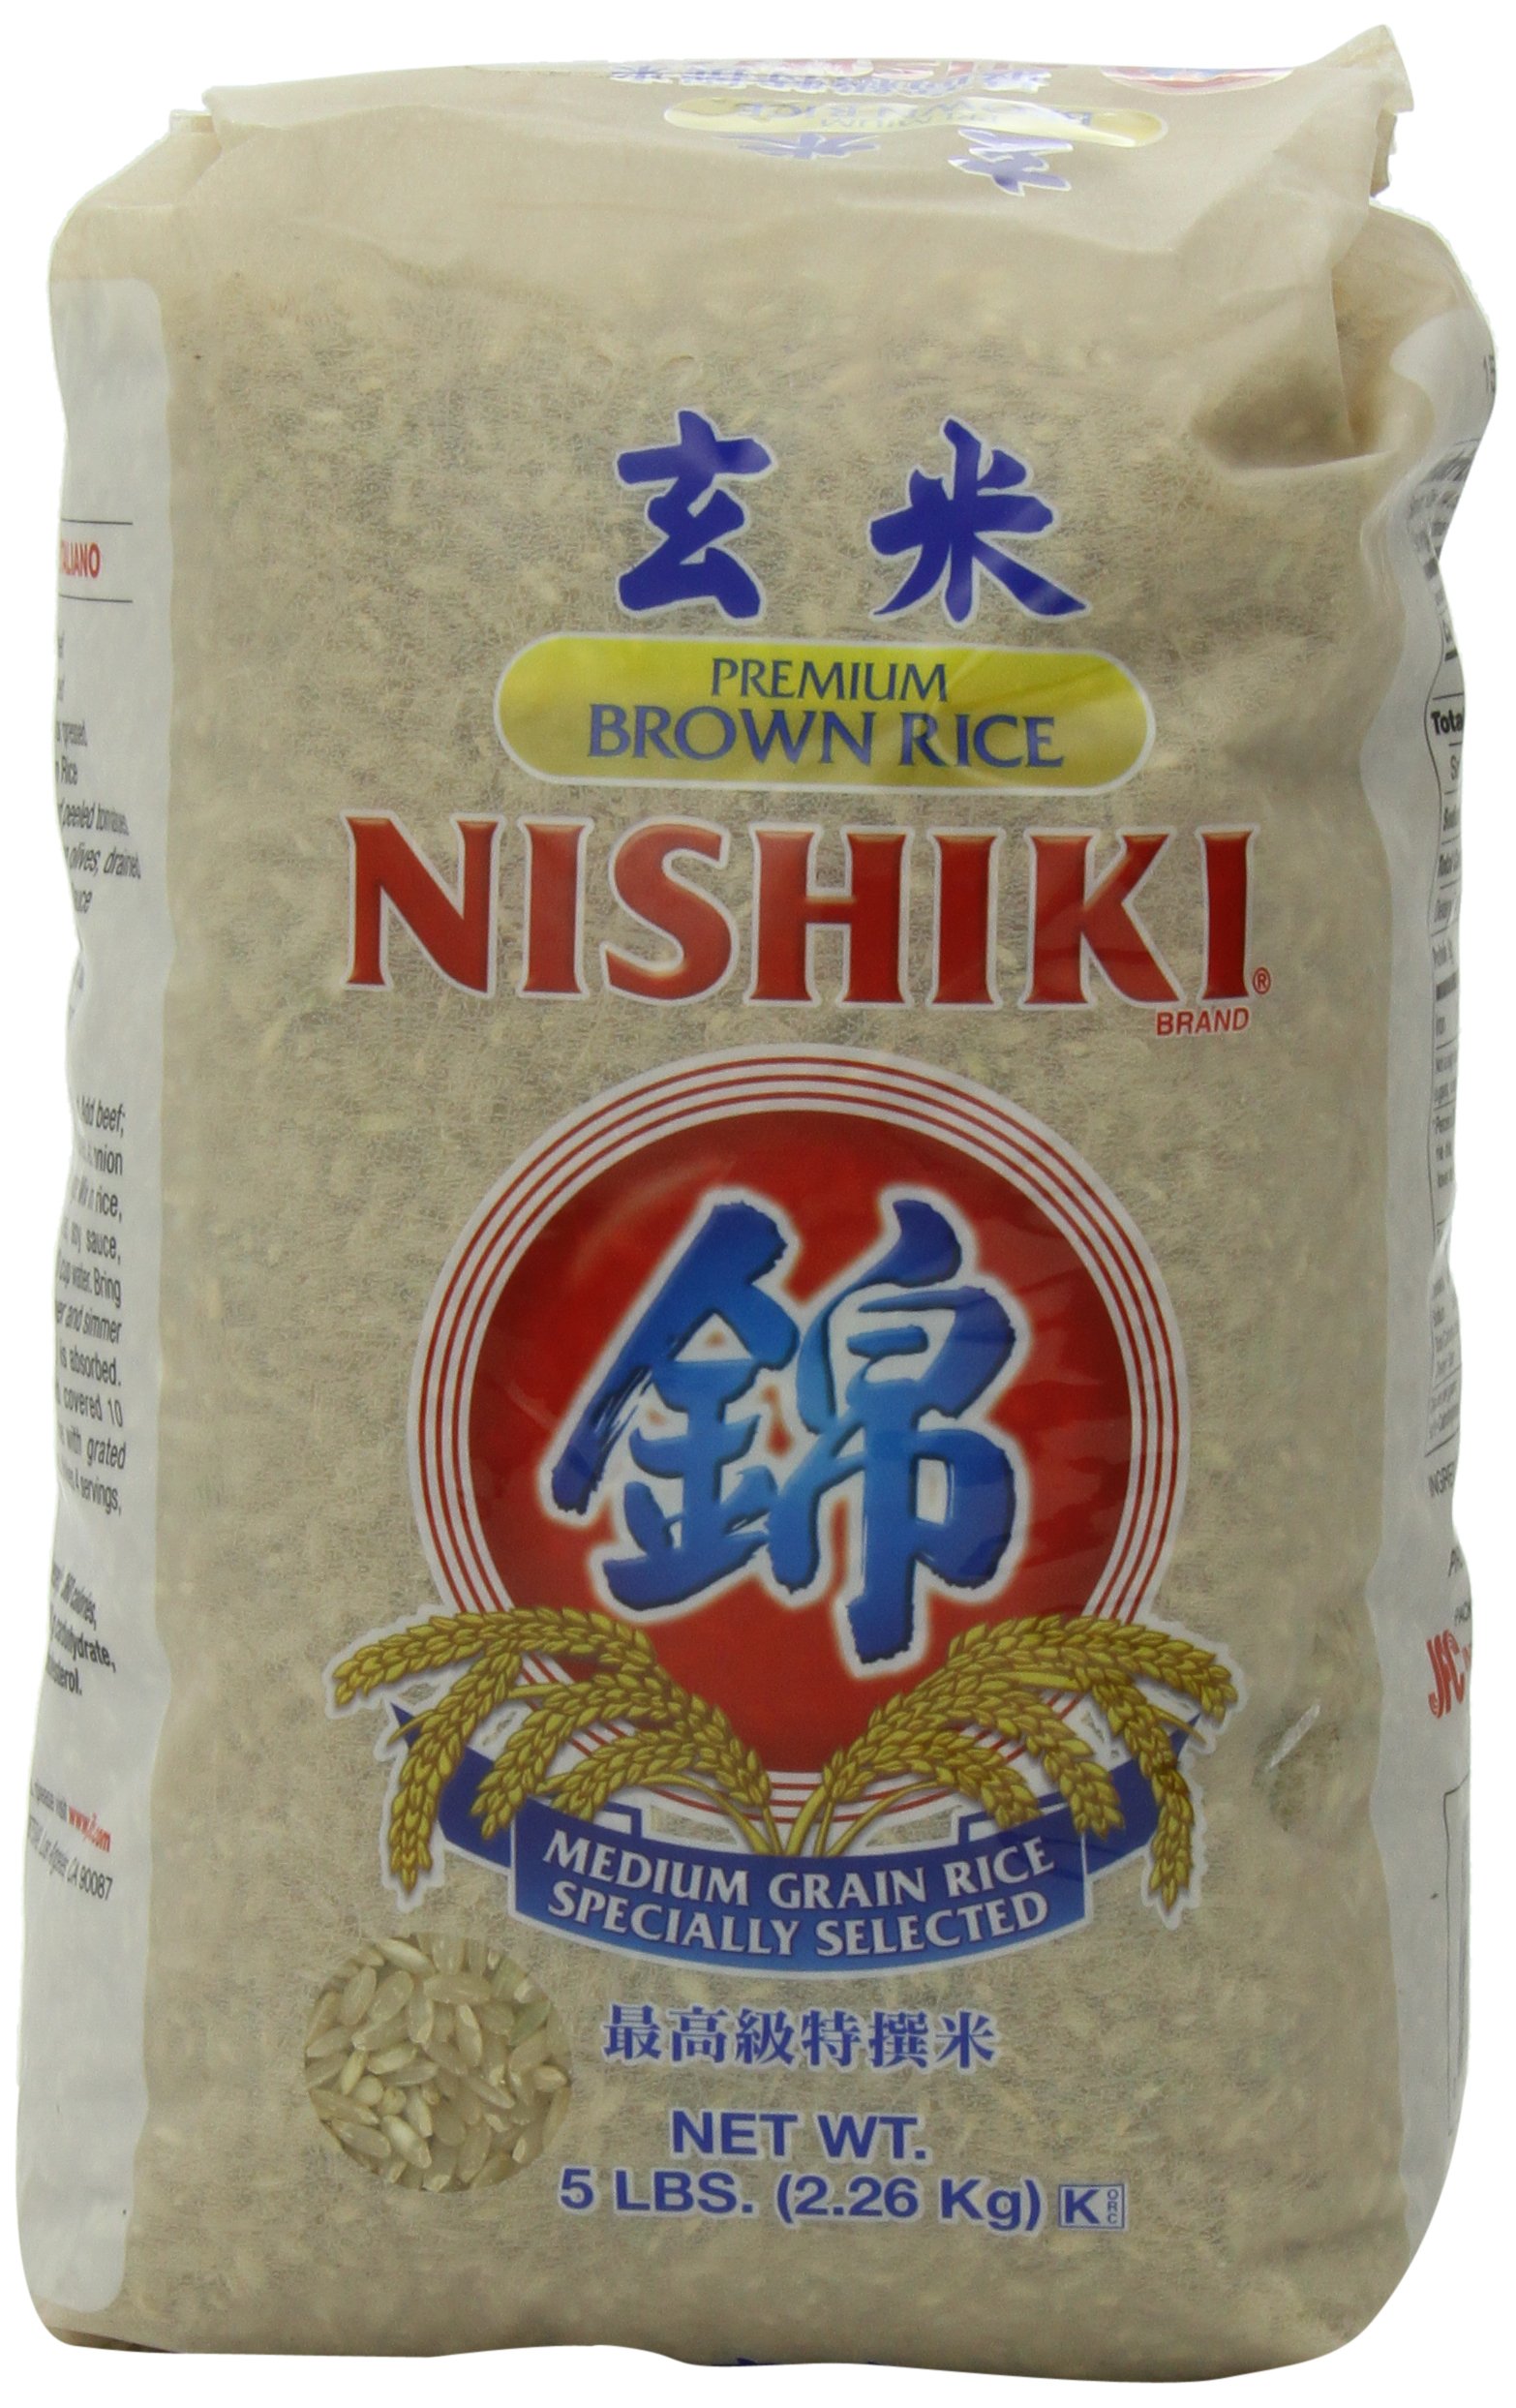 5-Lbs NISHIKI Premium Brown Rice $5.83 .40 cent coupon, Free Shipping w/ Prime or on $35+